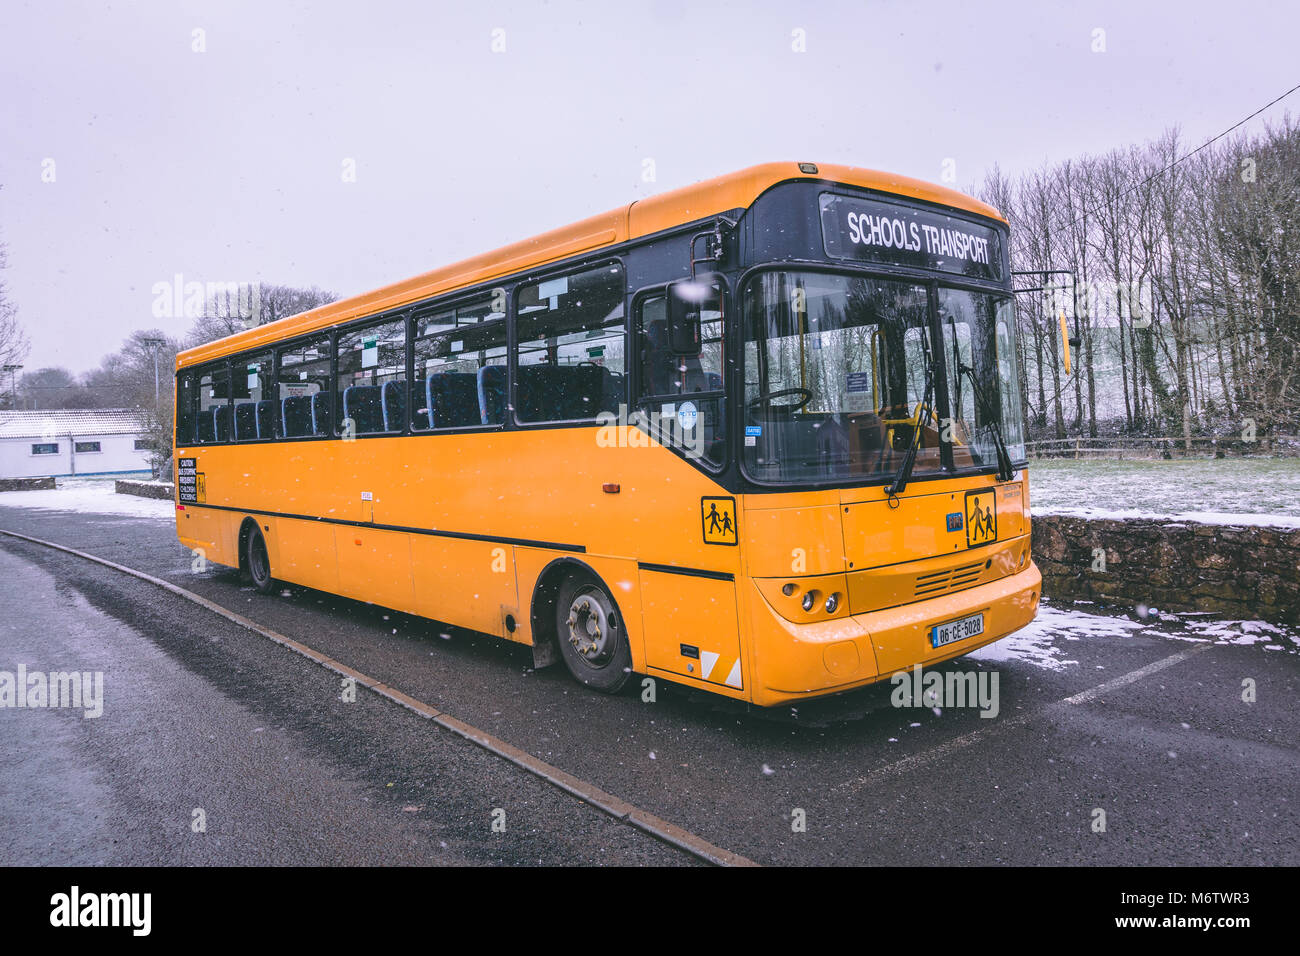 March 1st, 2018, Carrignavar, county Cork, Ireland - school bus parked during Storm Emma, also known as the Beast from the East. Stock Photo